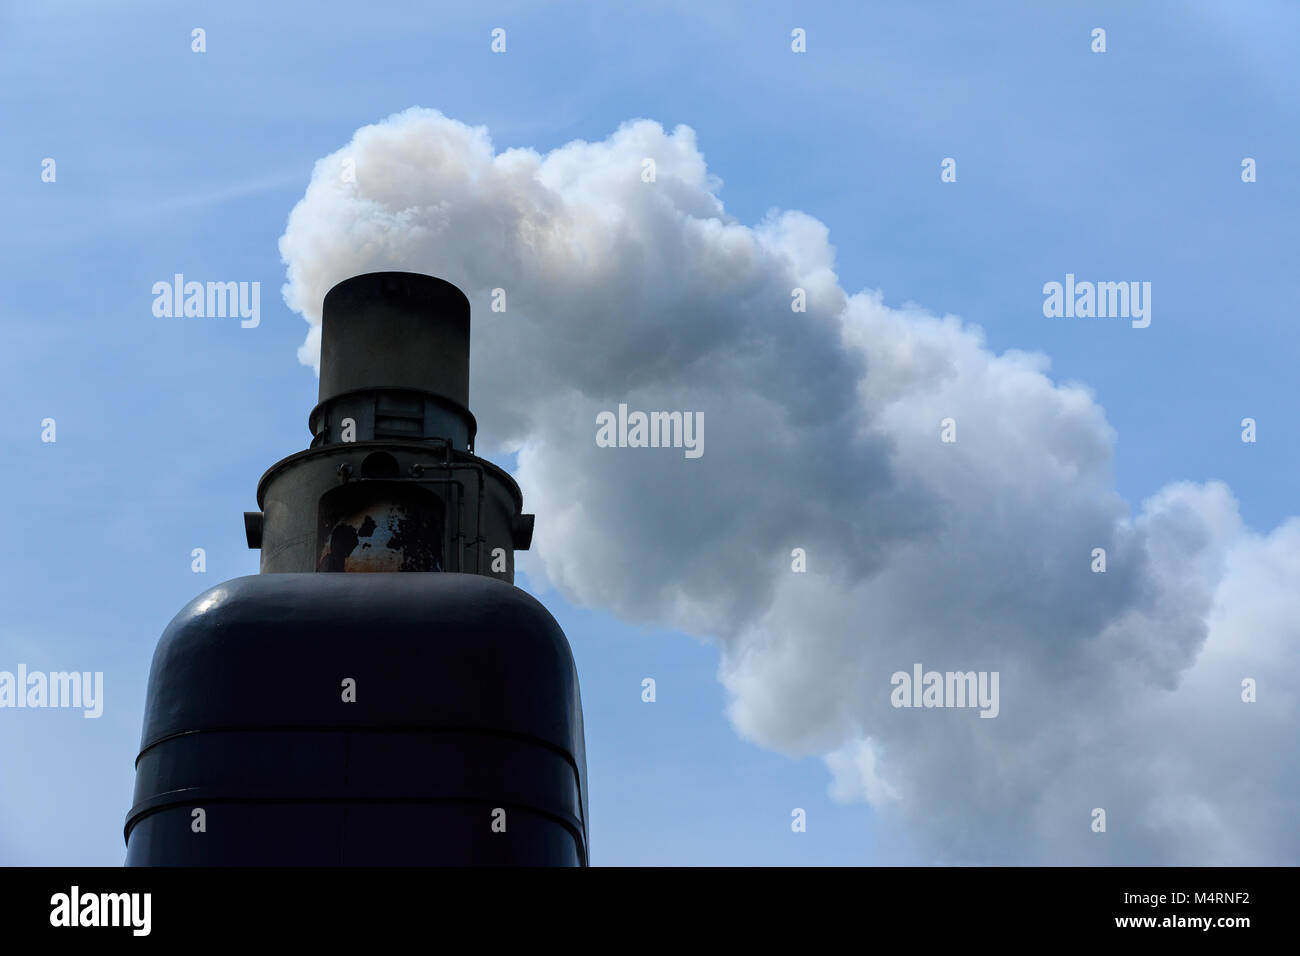 Exhaust pipe of old ship steaming with smoke Stock Photo